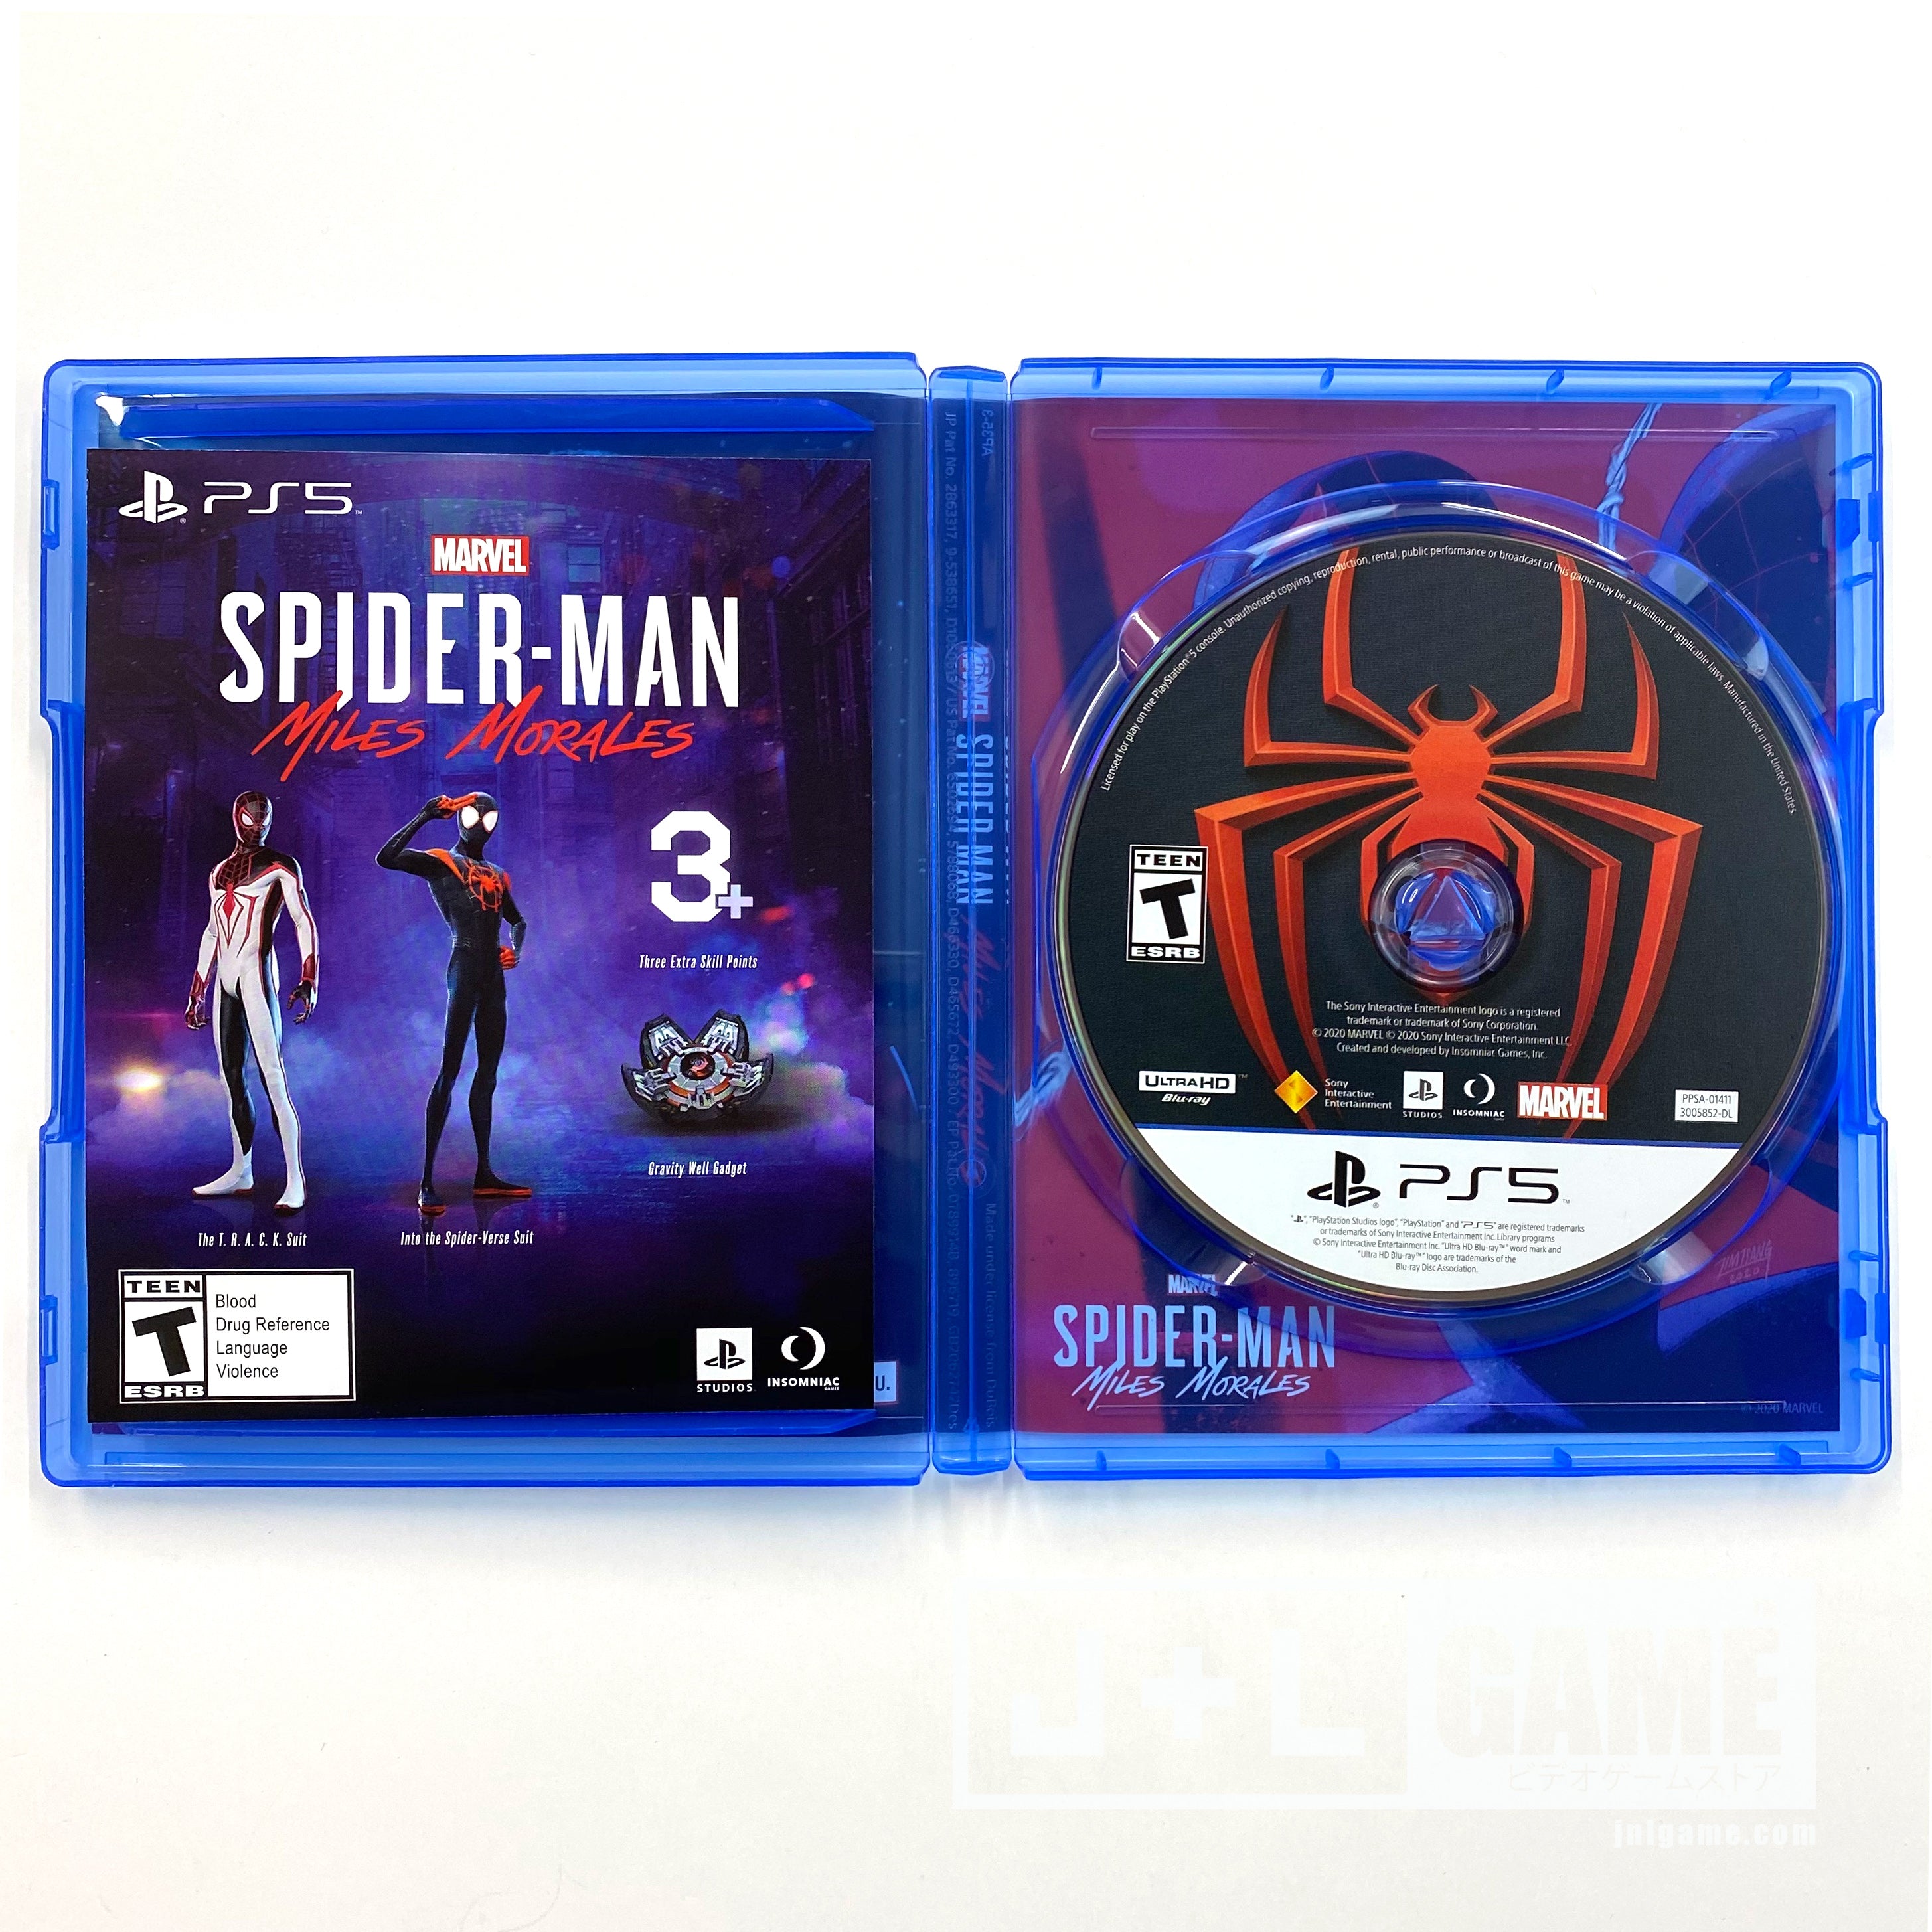 Marvel’s Spider-Man: Miles Morales Launch Edition - (PS5) PlayStation 5 [UNBOXING] Video Games PlayStation   